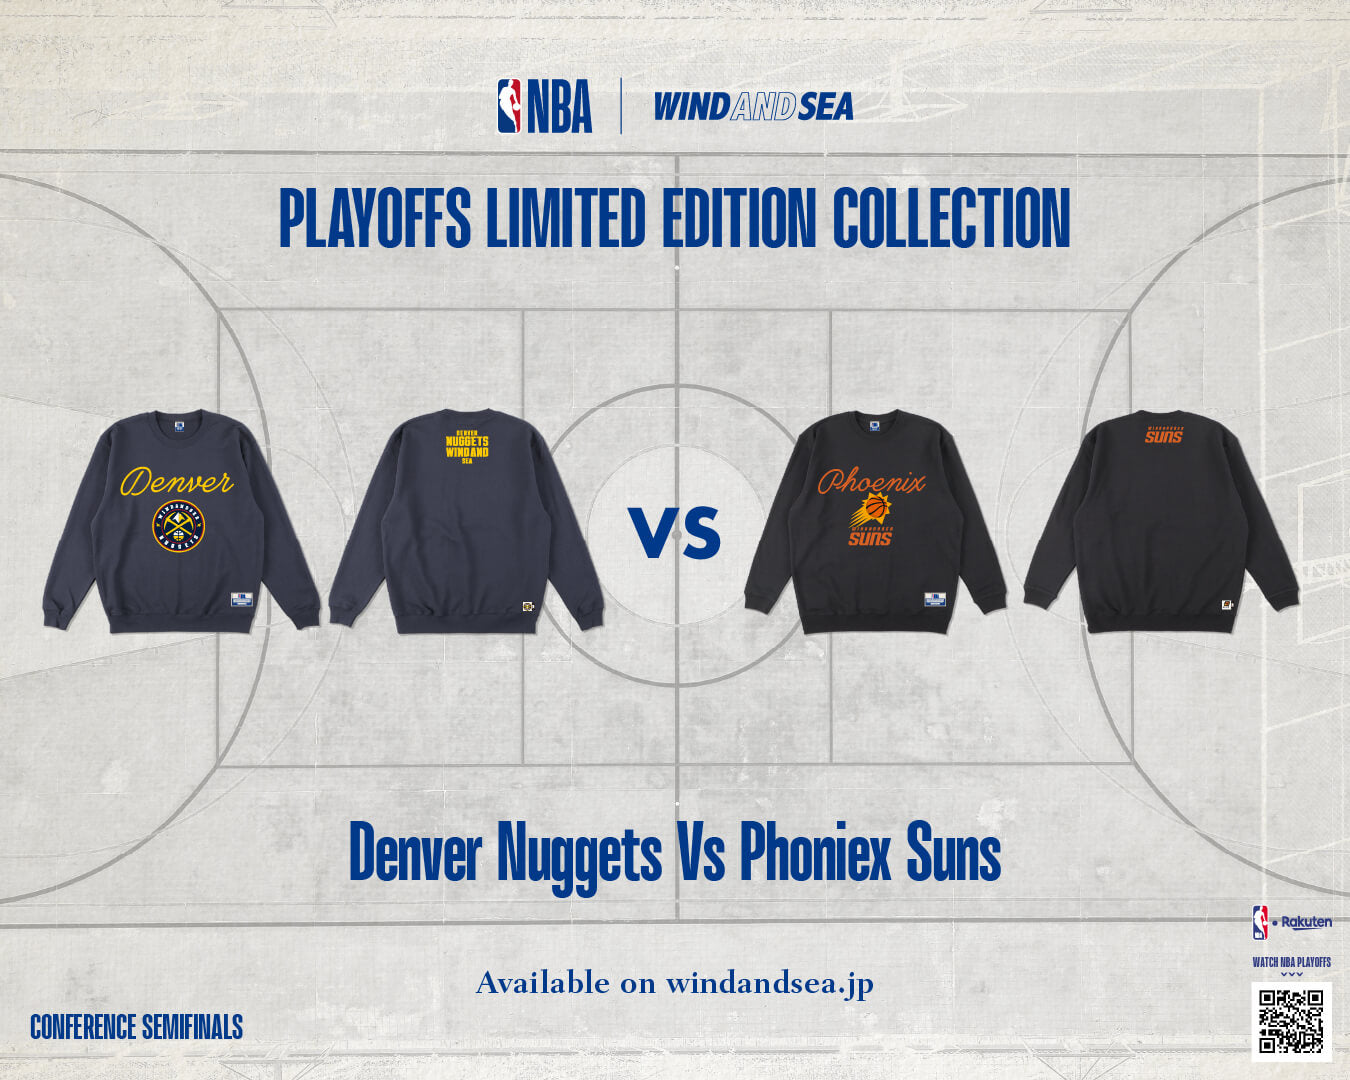 NBA 2023 PLAYOFFS LIMITED EDITION COLLECTION – WIND AND SEA